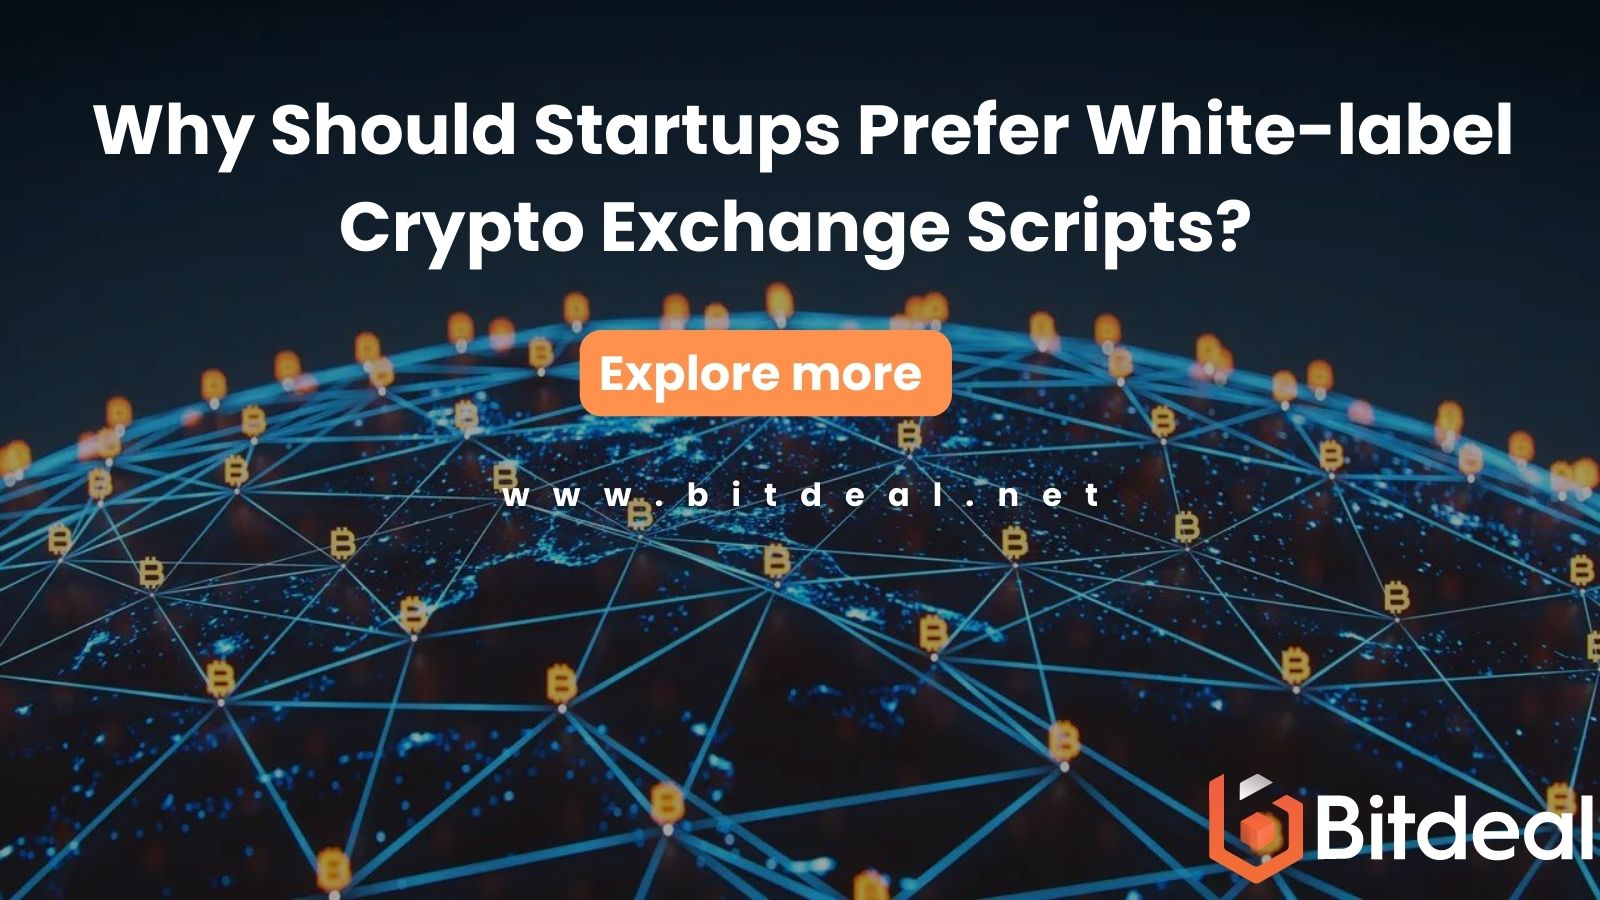 Why Should Startups Prefer White-label Crypto Exchange Scripts?